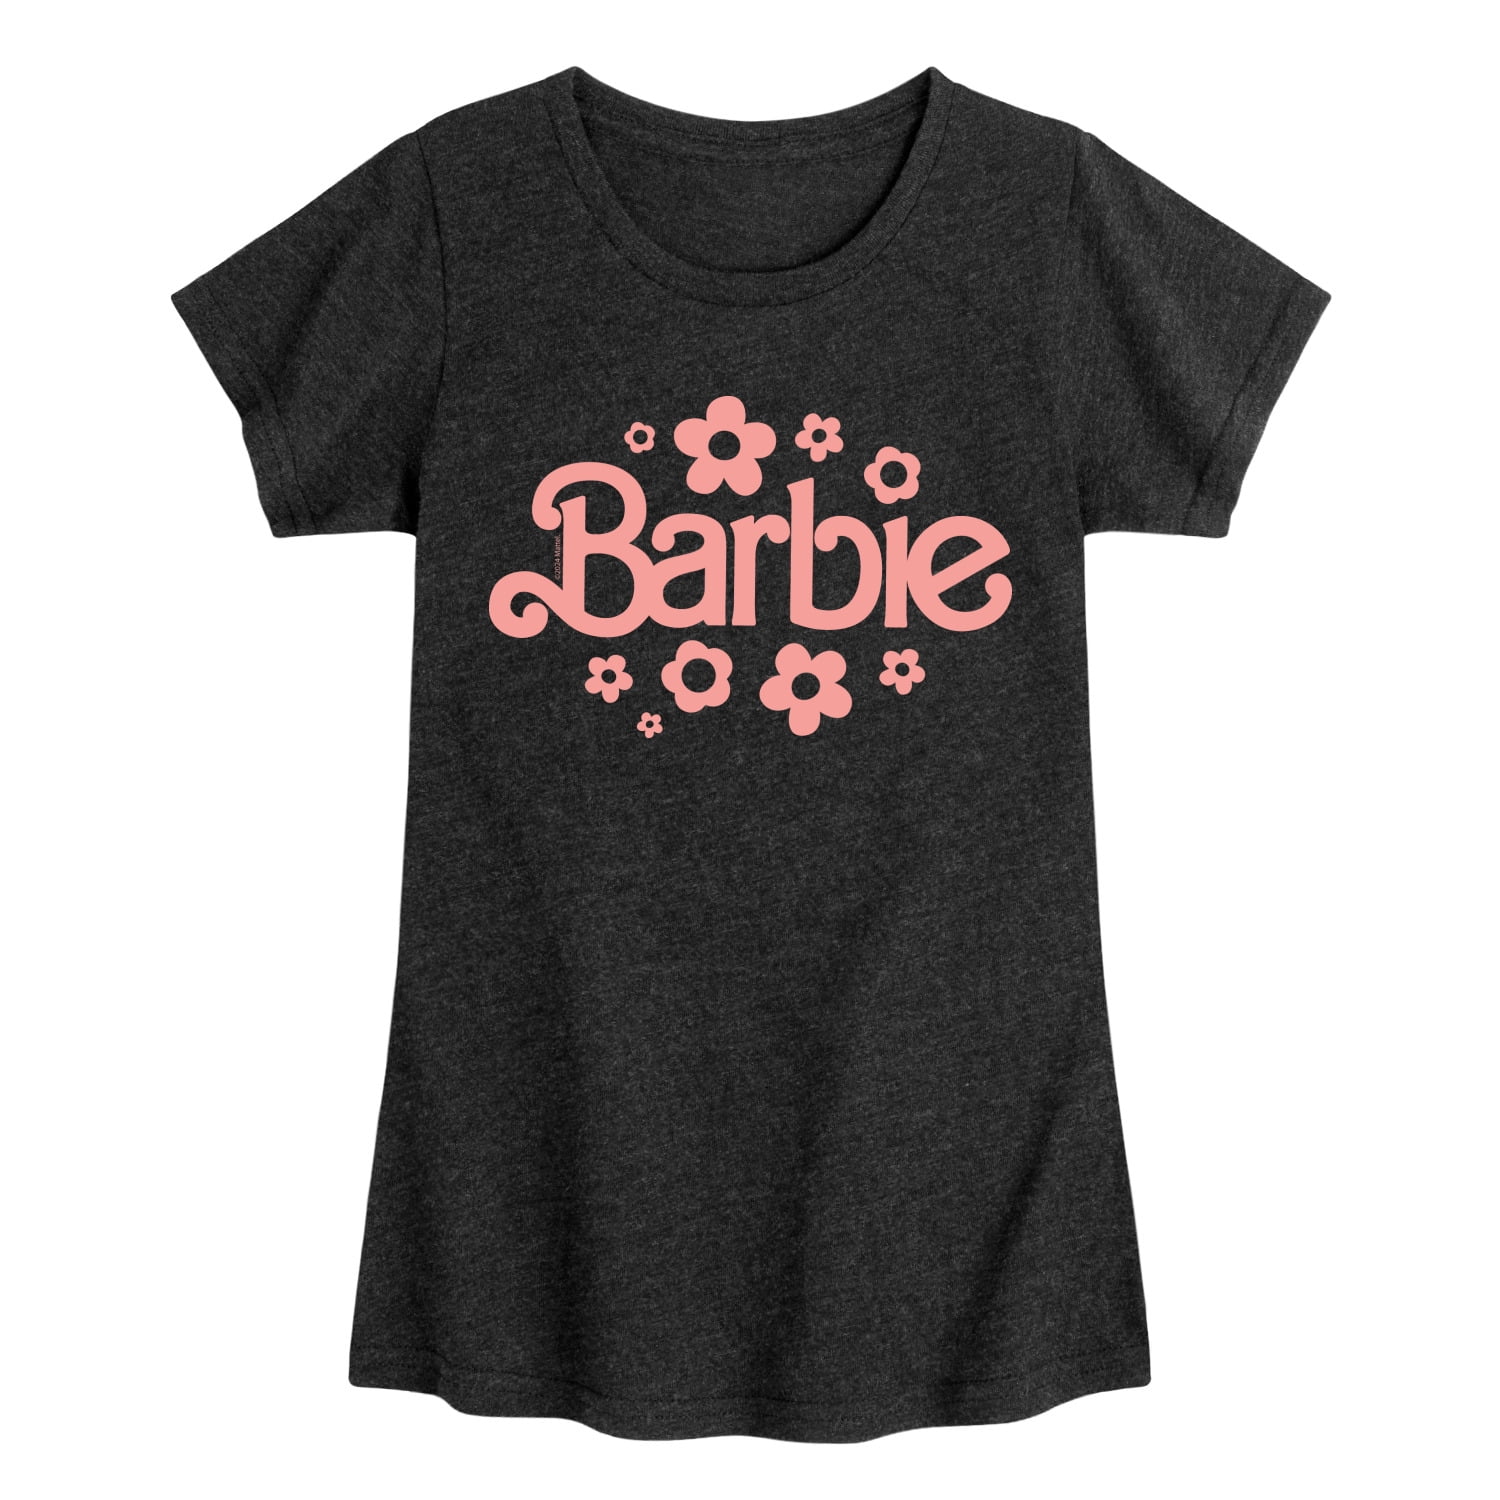 Barbie - Barbie One Color Retro Flowers - Girls Fitted Short Sleeve ...